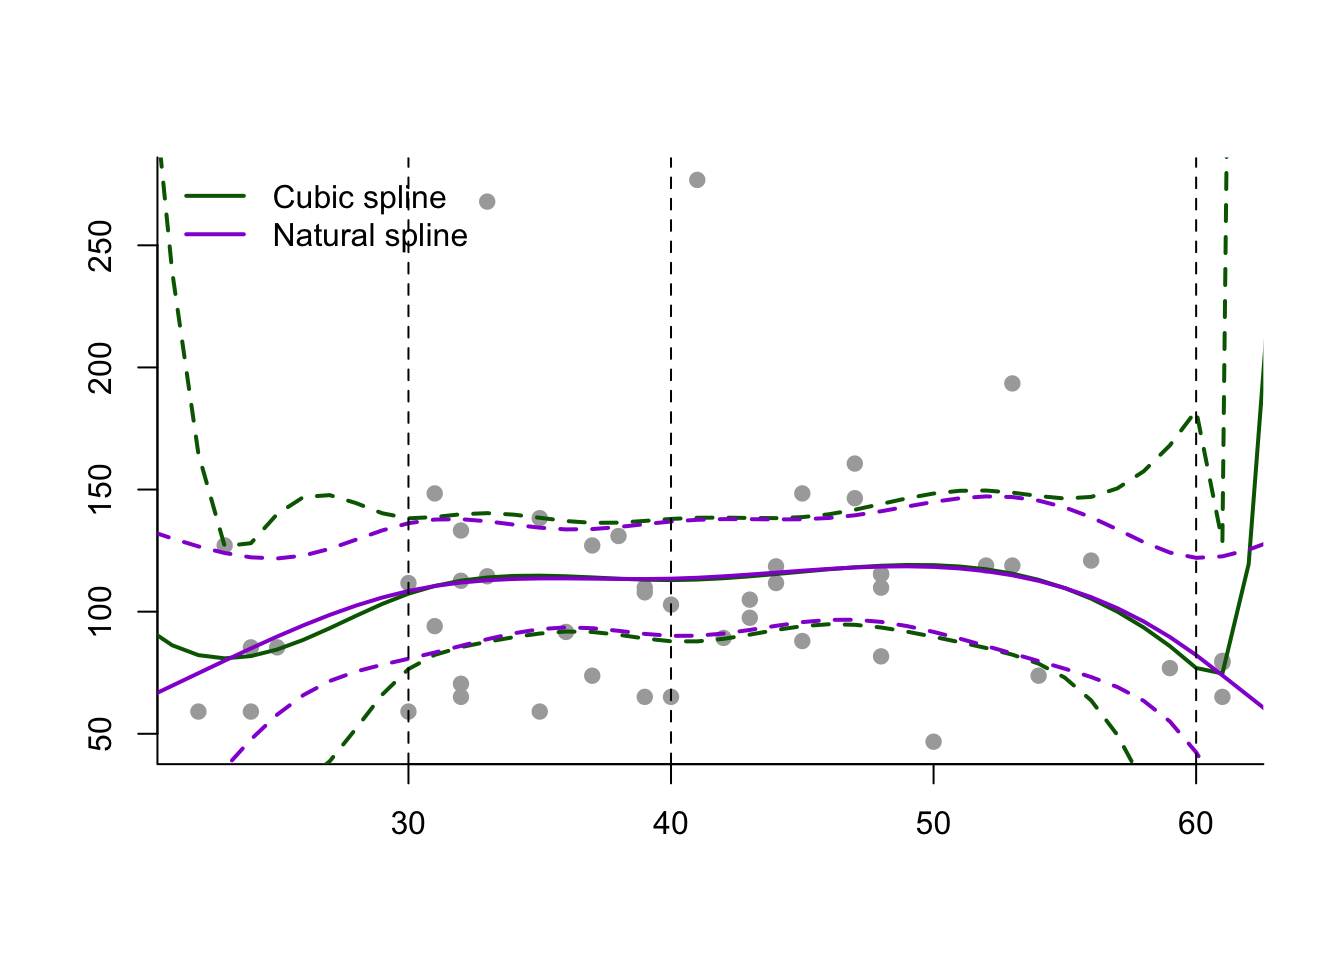 Fitting cubic and natural splines to a subset of the Wage data.